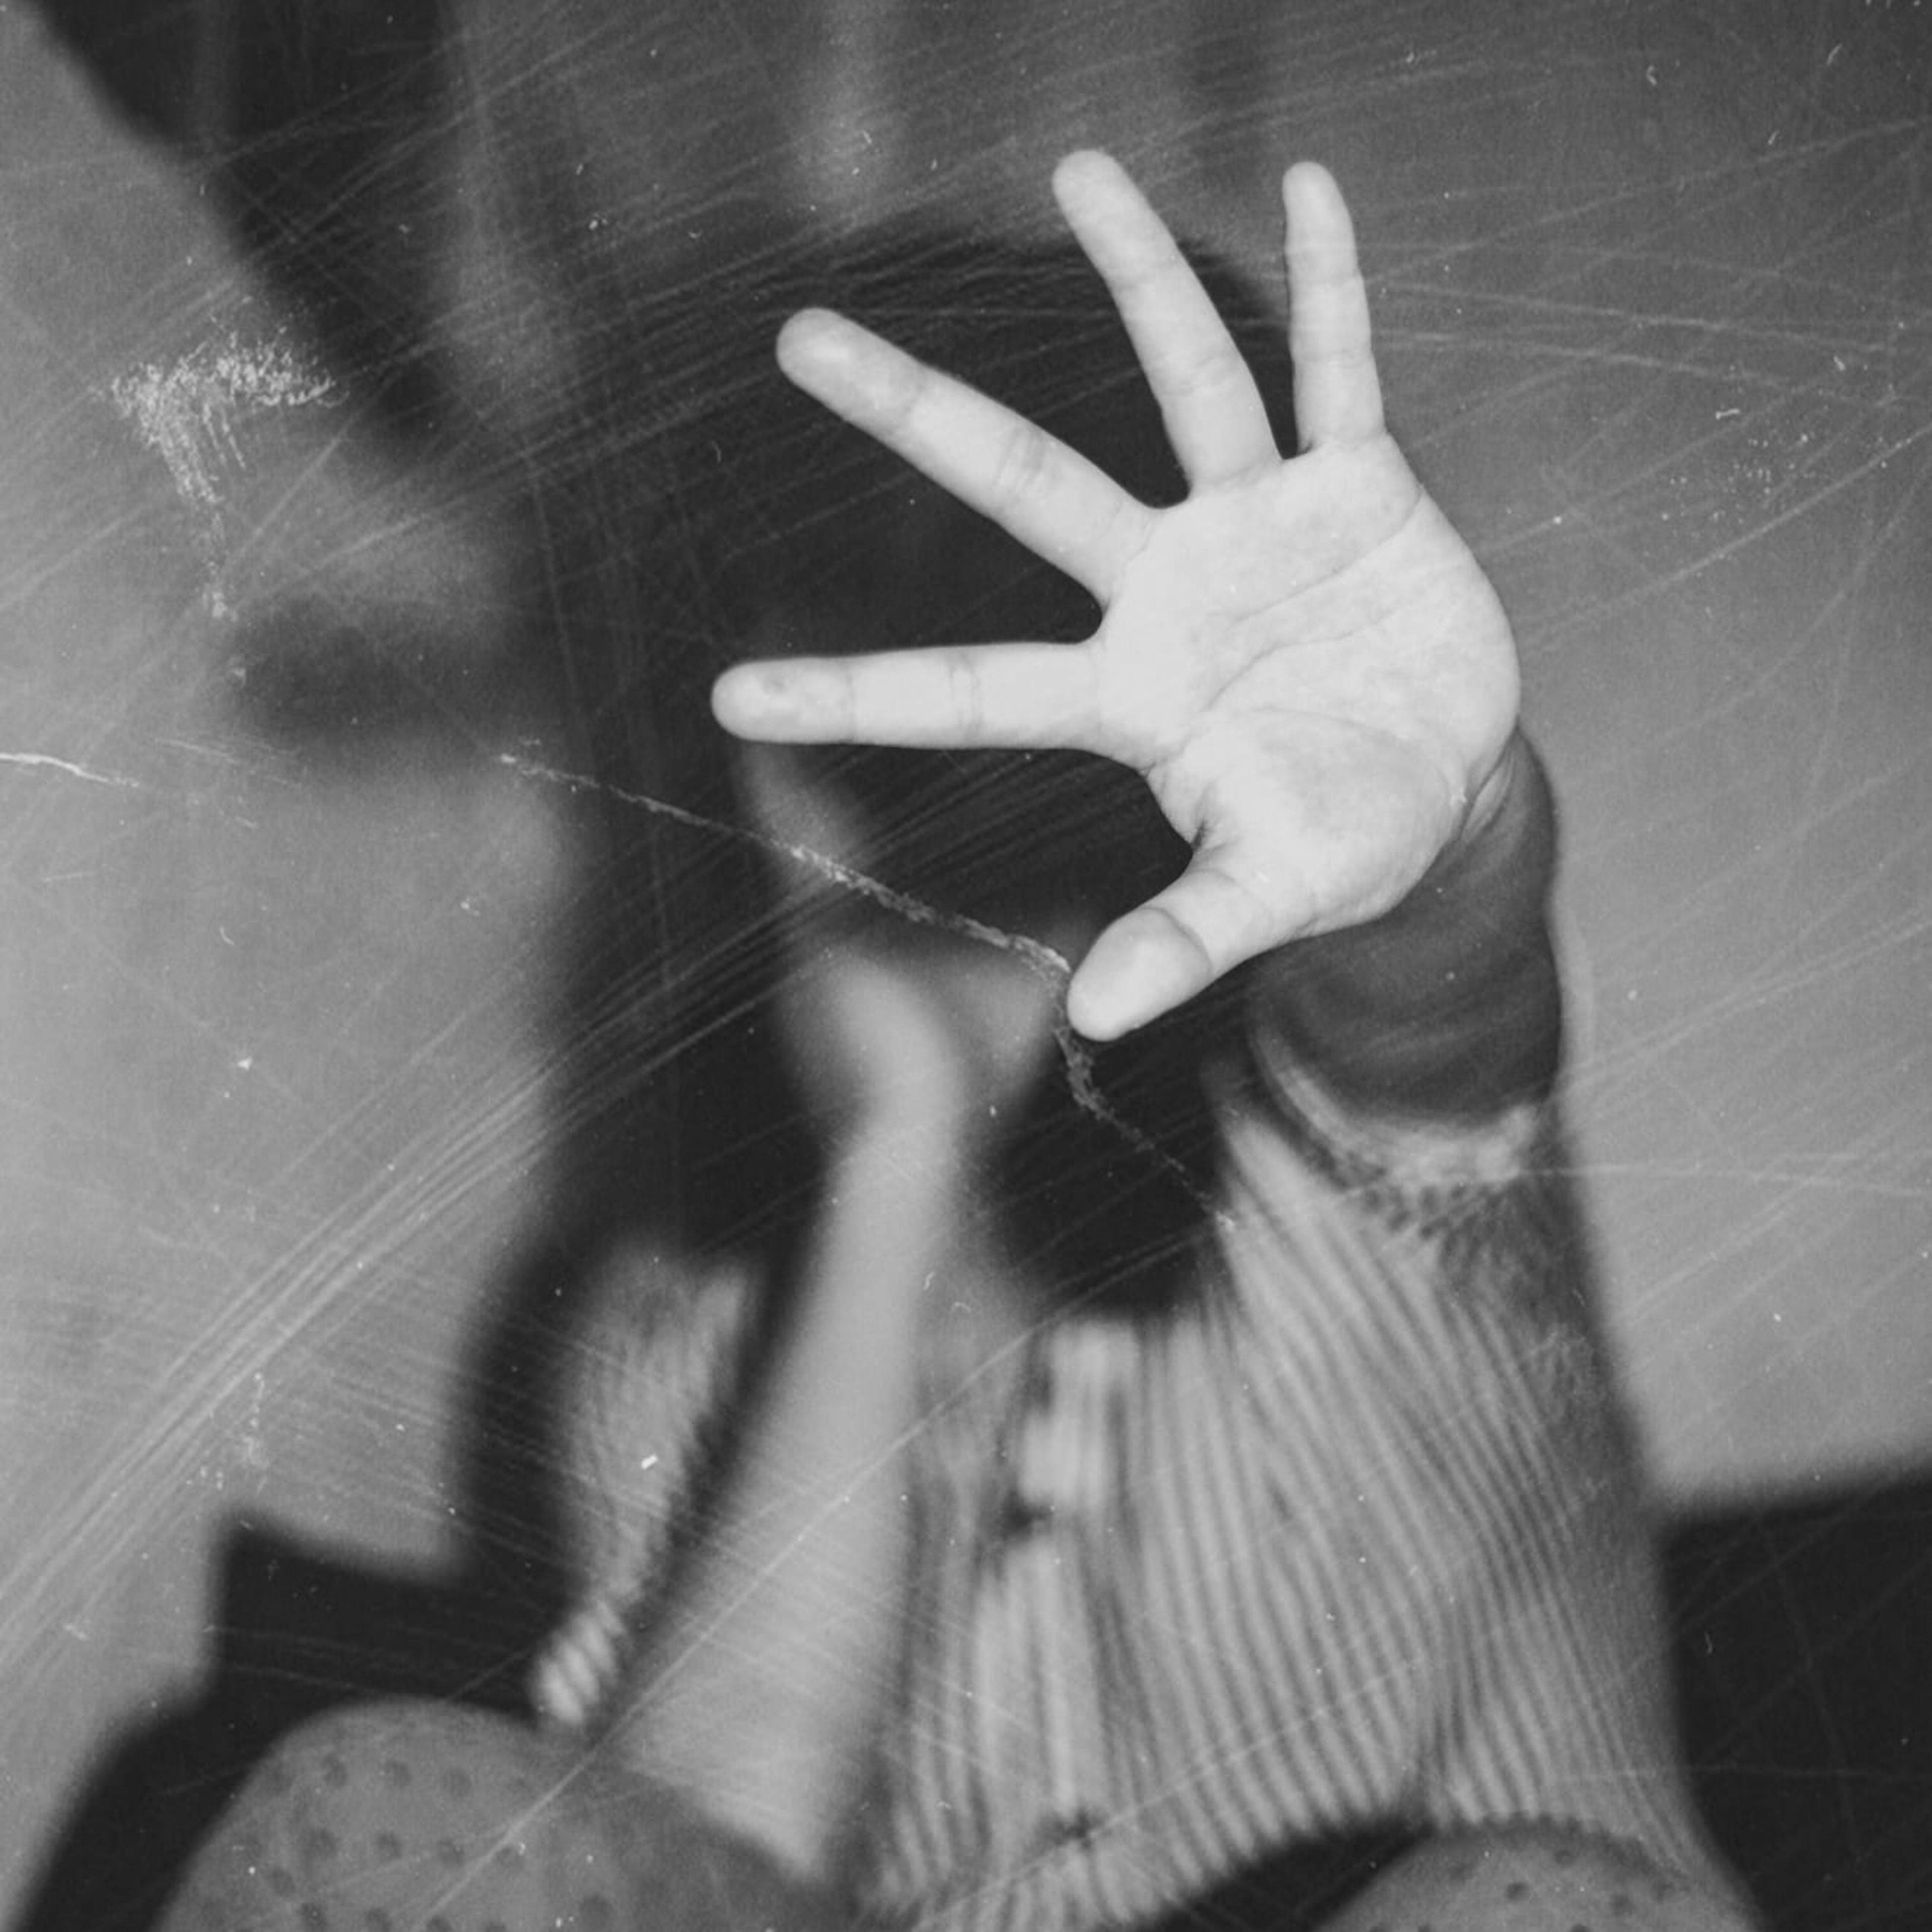 An old, scratched photo of a family member holding a hand up to stop the photographer from capturing their image.